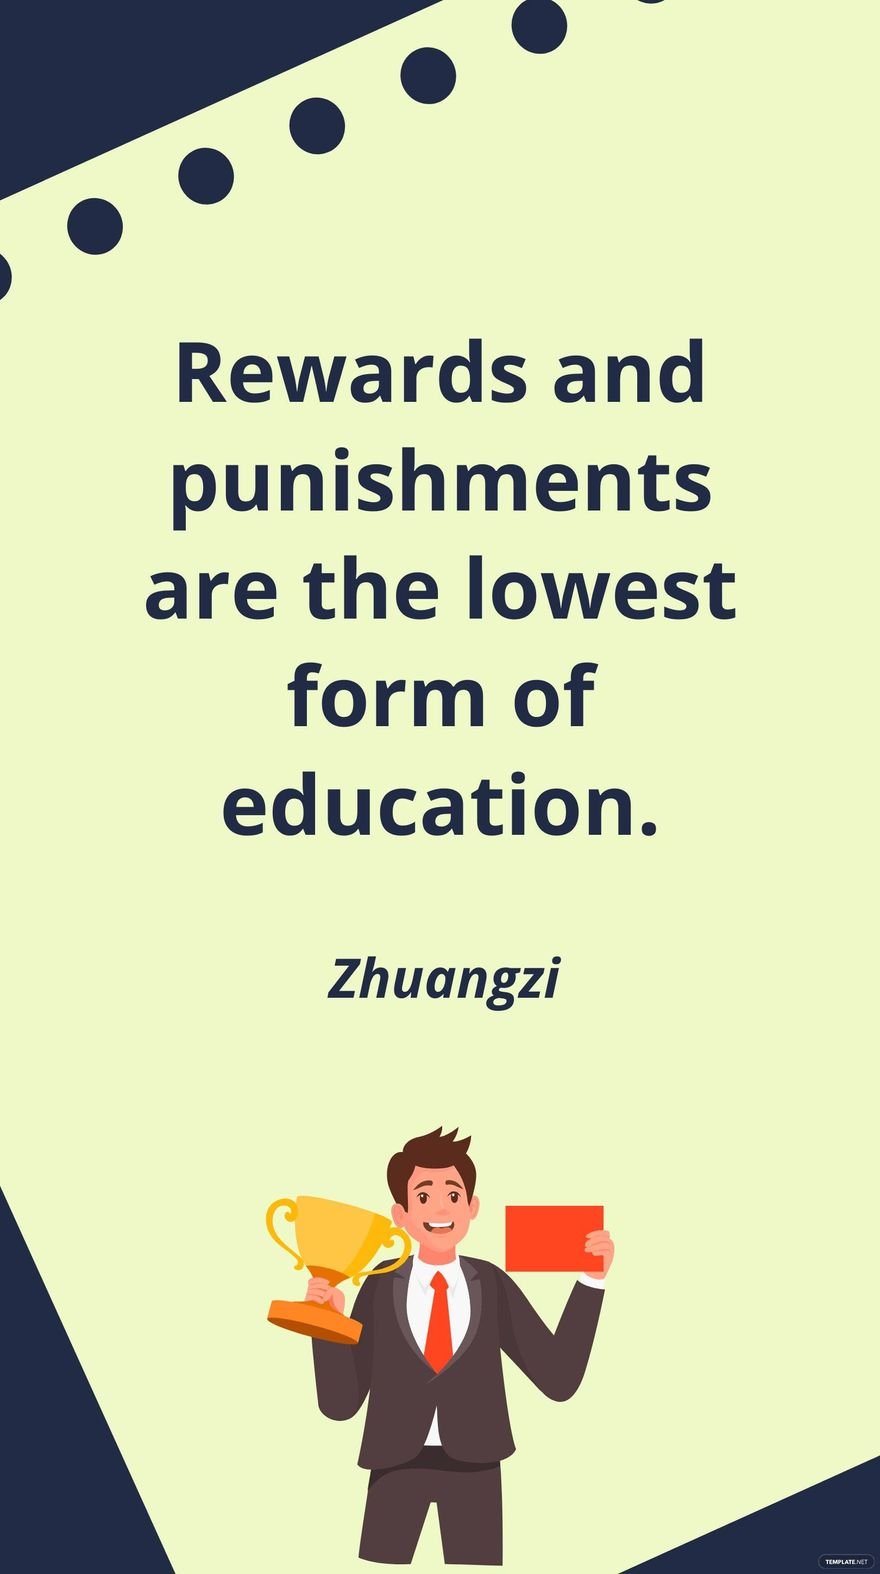 Zhuangzi - Rewards and punishments are the lowest form of education.